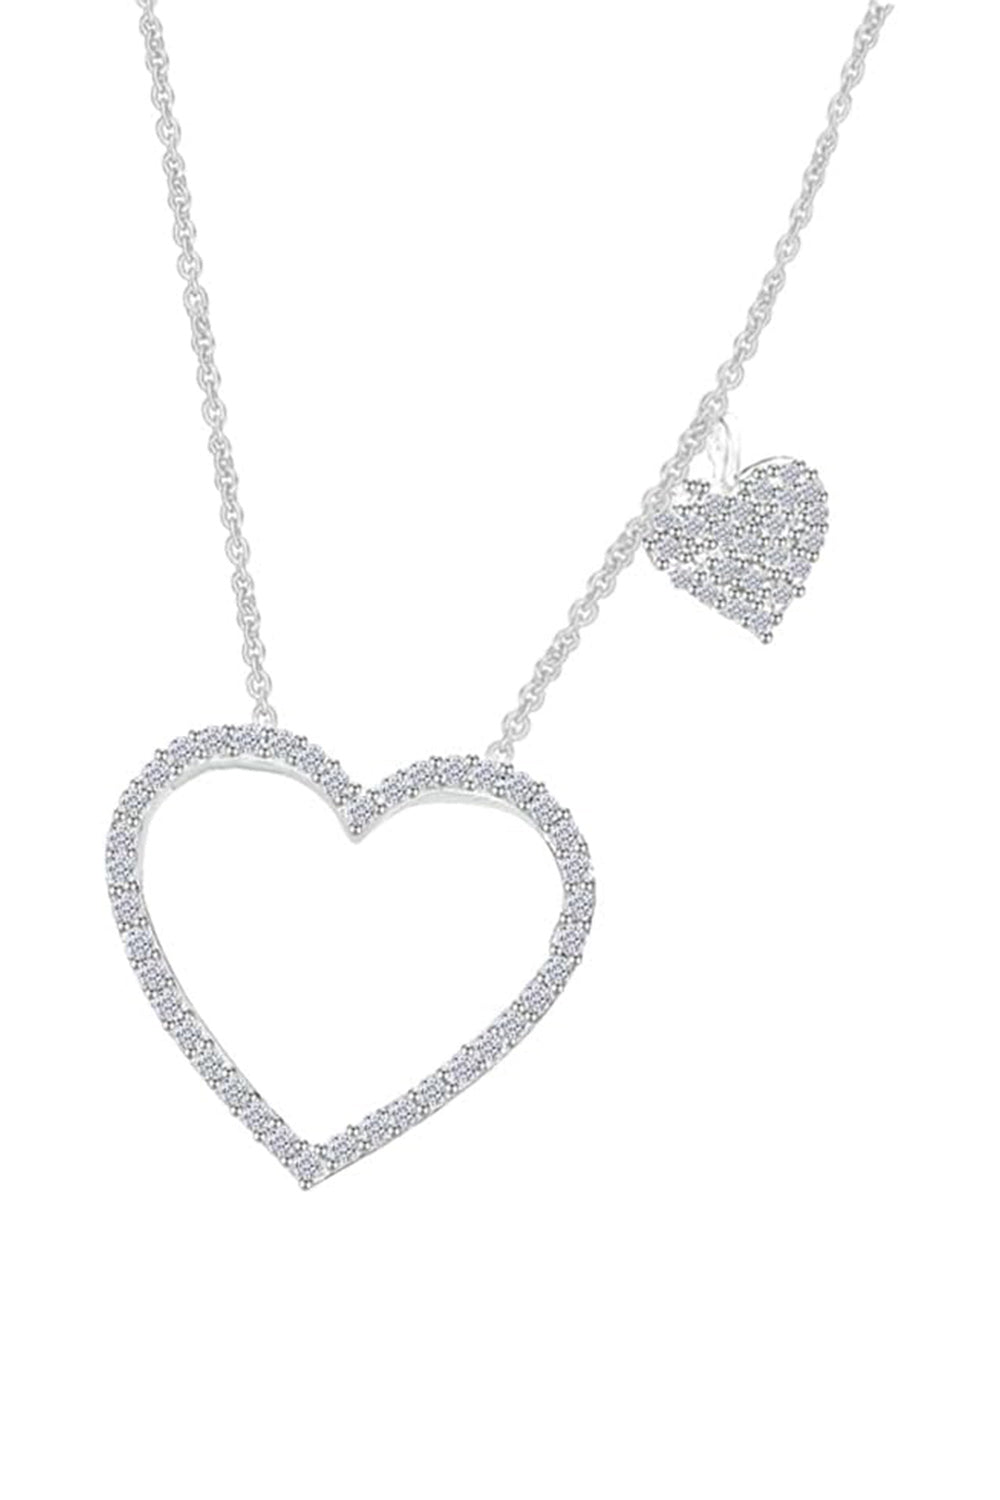 White Gold Color Heart Outline with Heart Dangle Station Necklace 